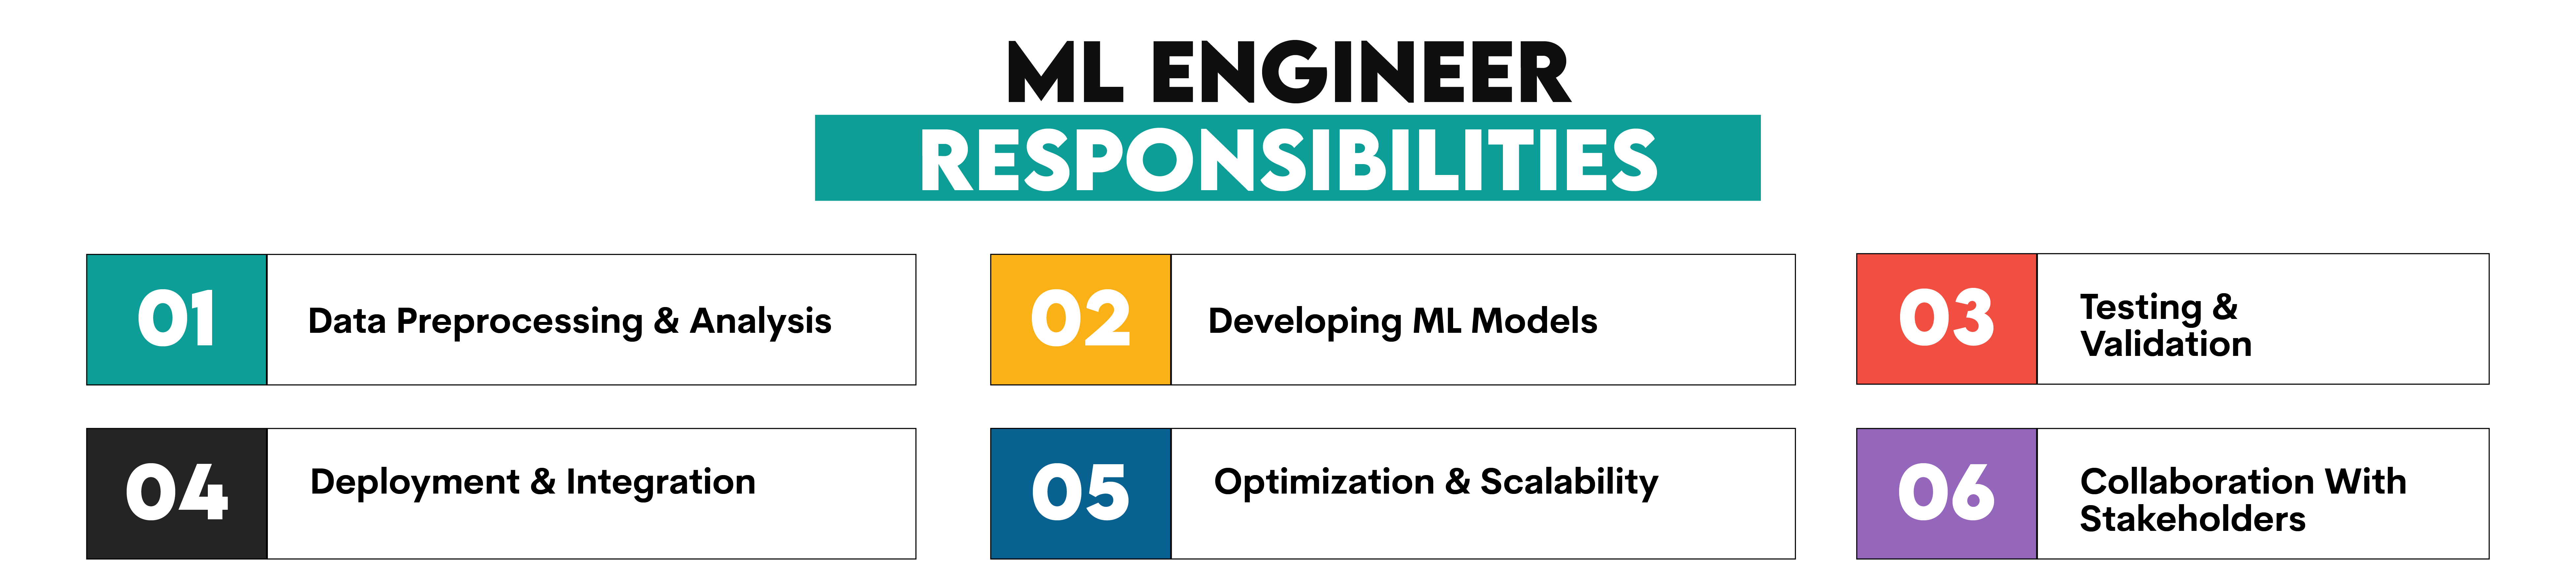 Key Responsibilities of a Machine Learning Engineer